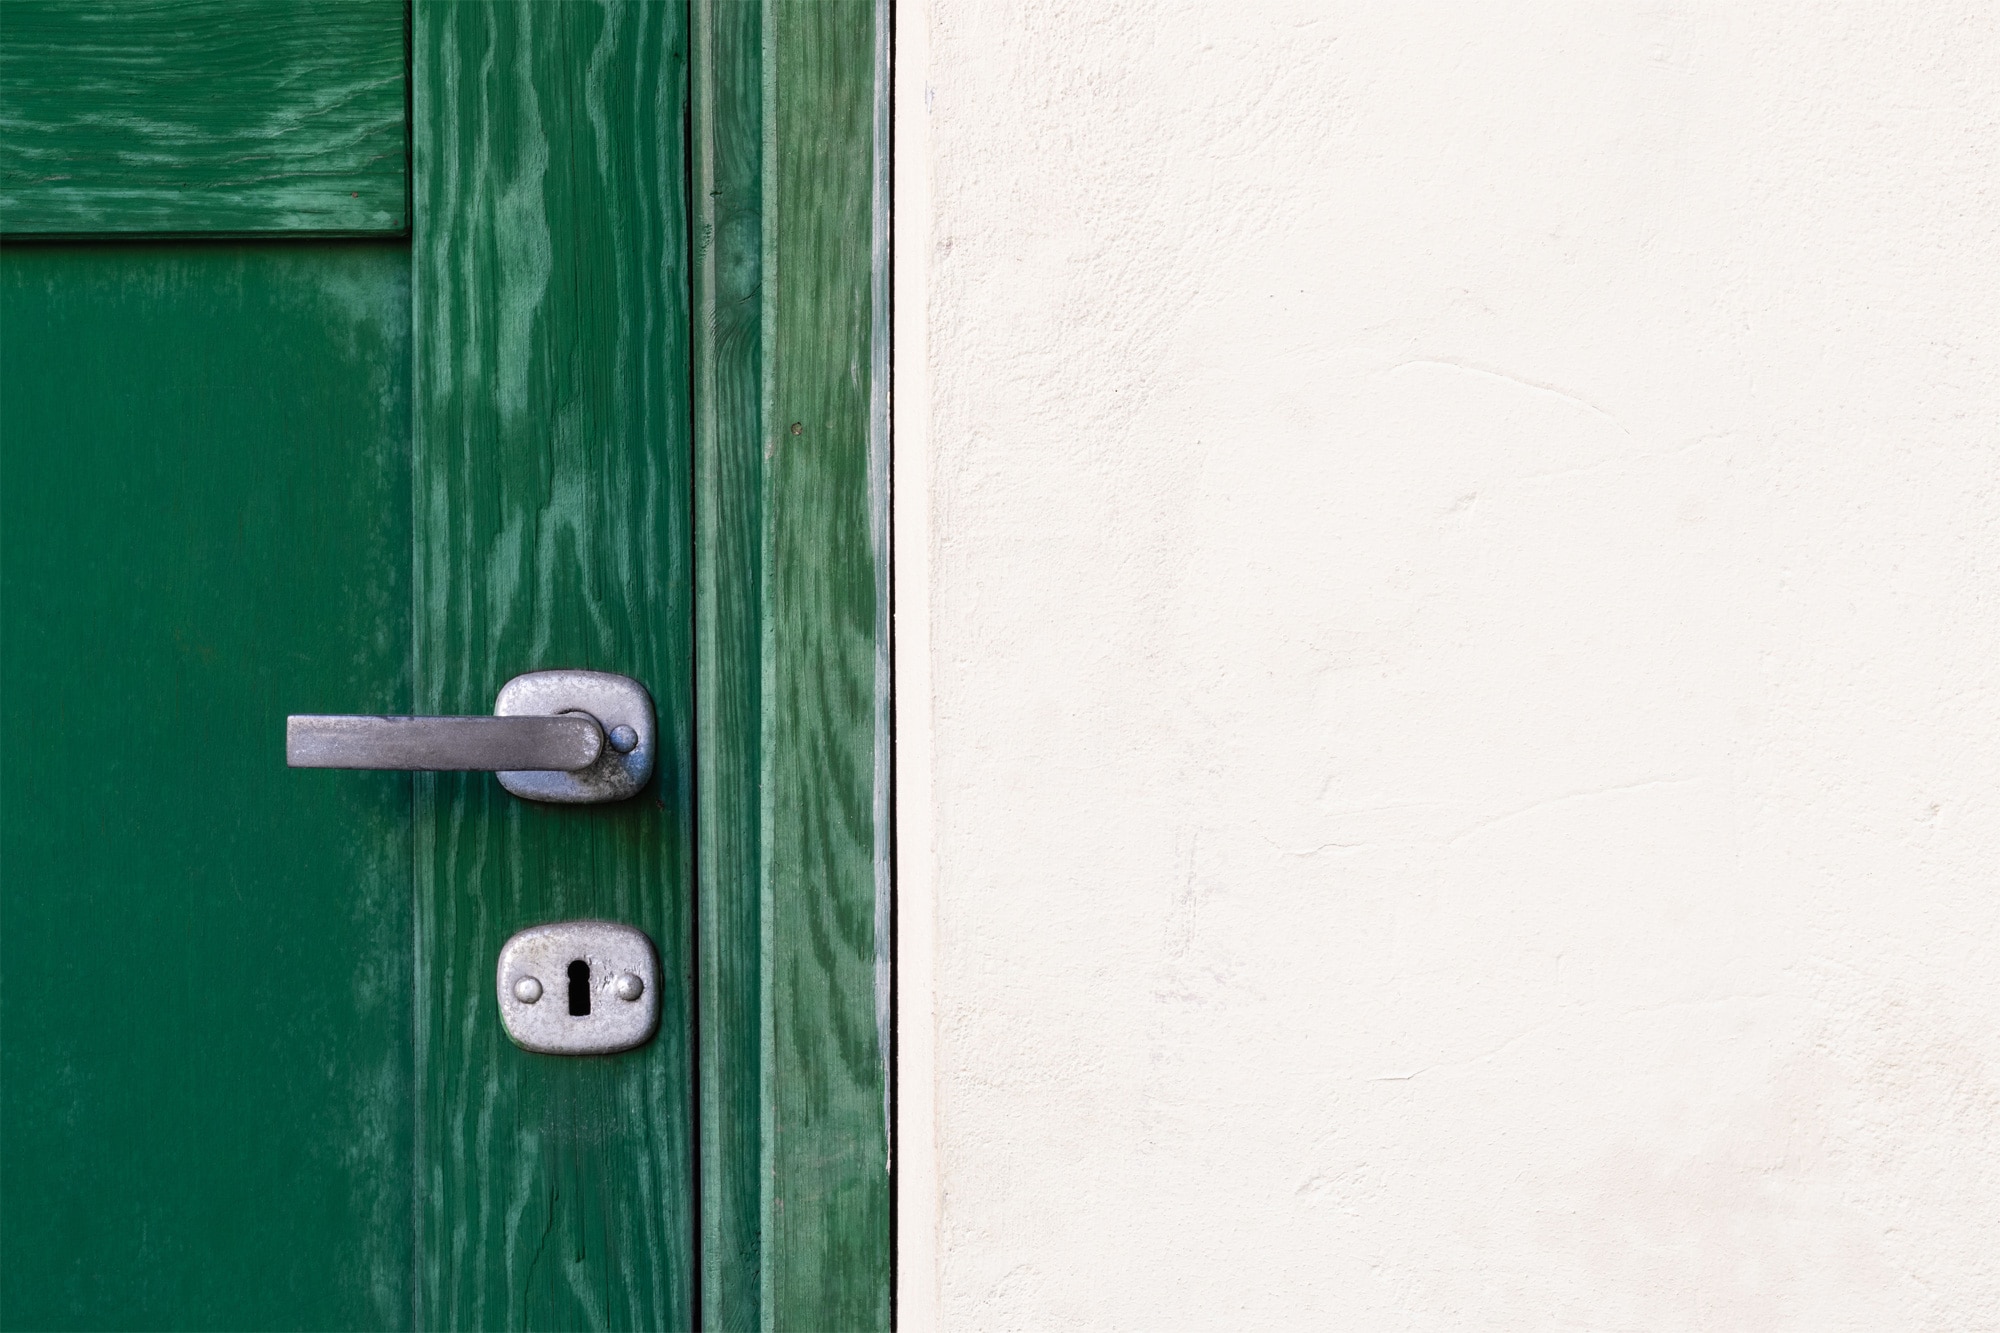 A green door and knob to symbolize the decision of going from side-hustle to full-time